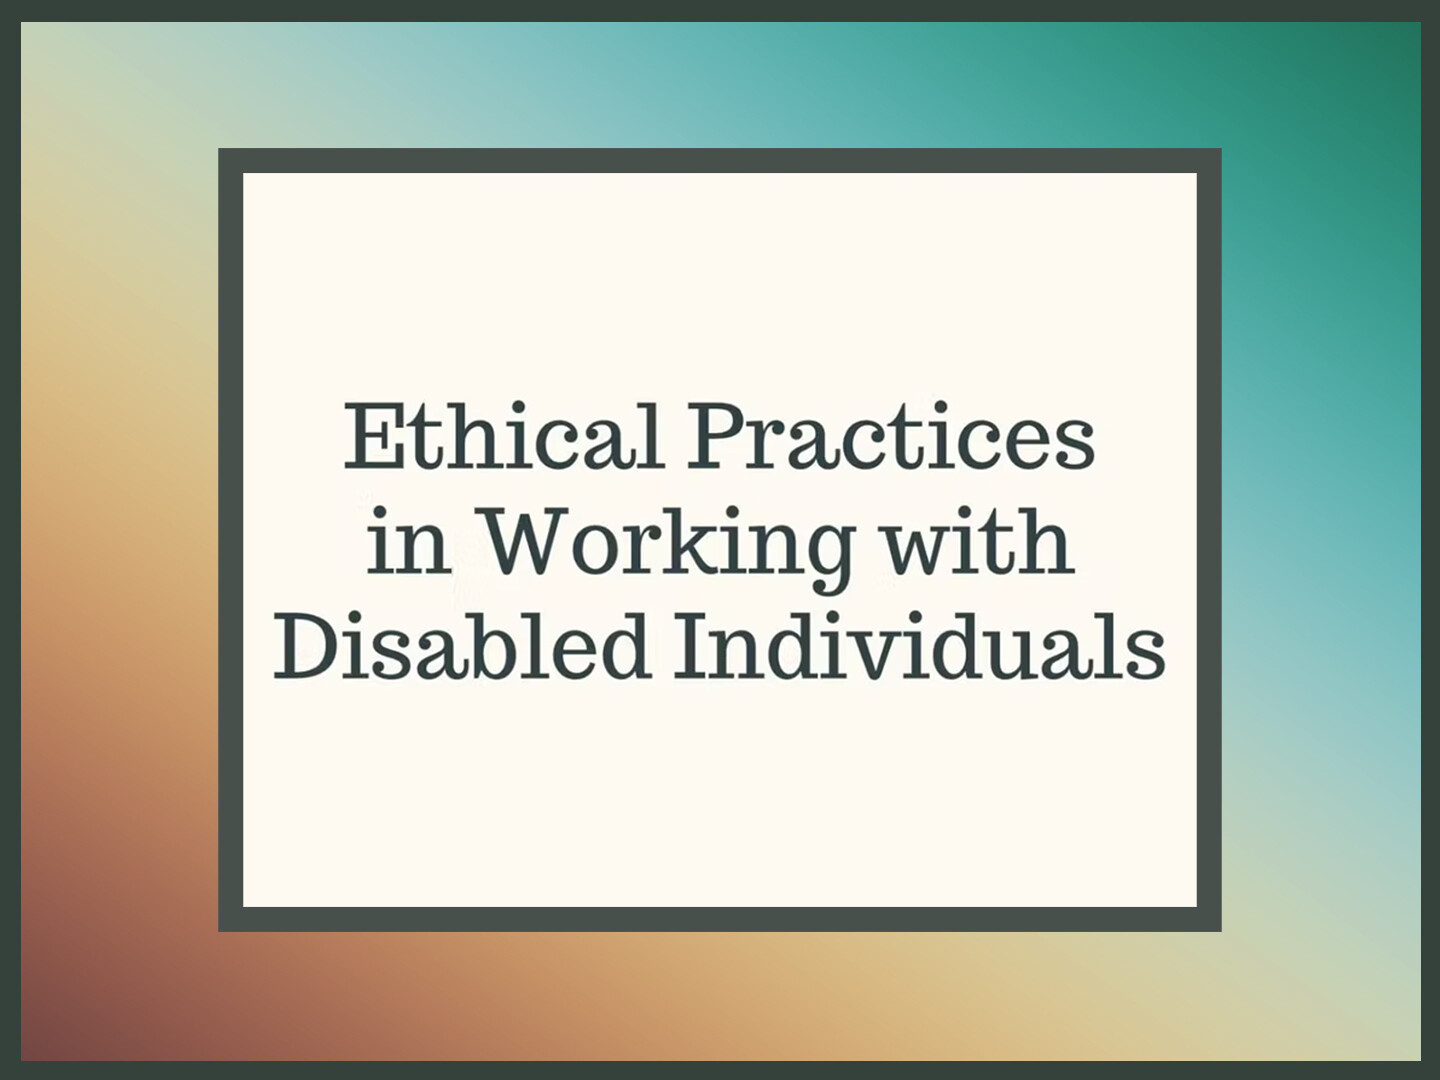 Ethical Practices in Working with
Disabled Individuals CE Training